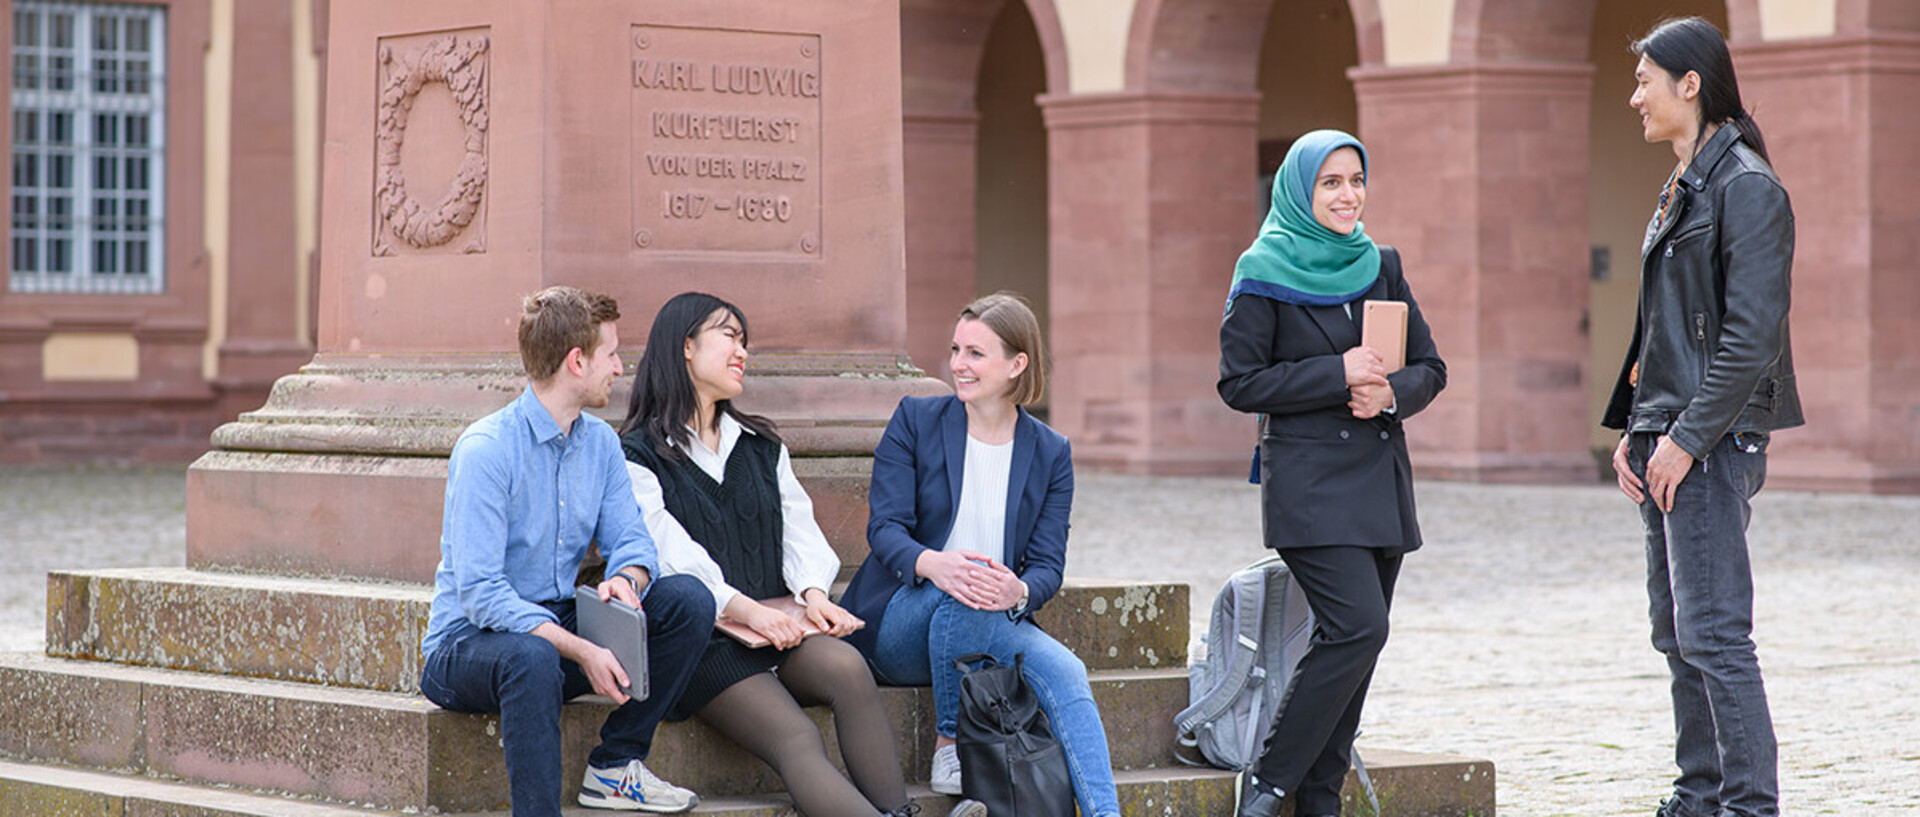 Five students conversing by the statue of Prince-Elector Karl Ludwig on the Ehrenhof of the Palace. Three are sitting on the steps of the monument. Two are standing.